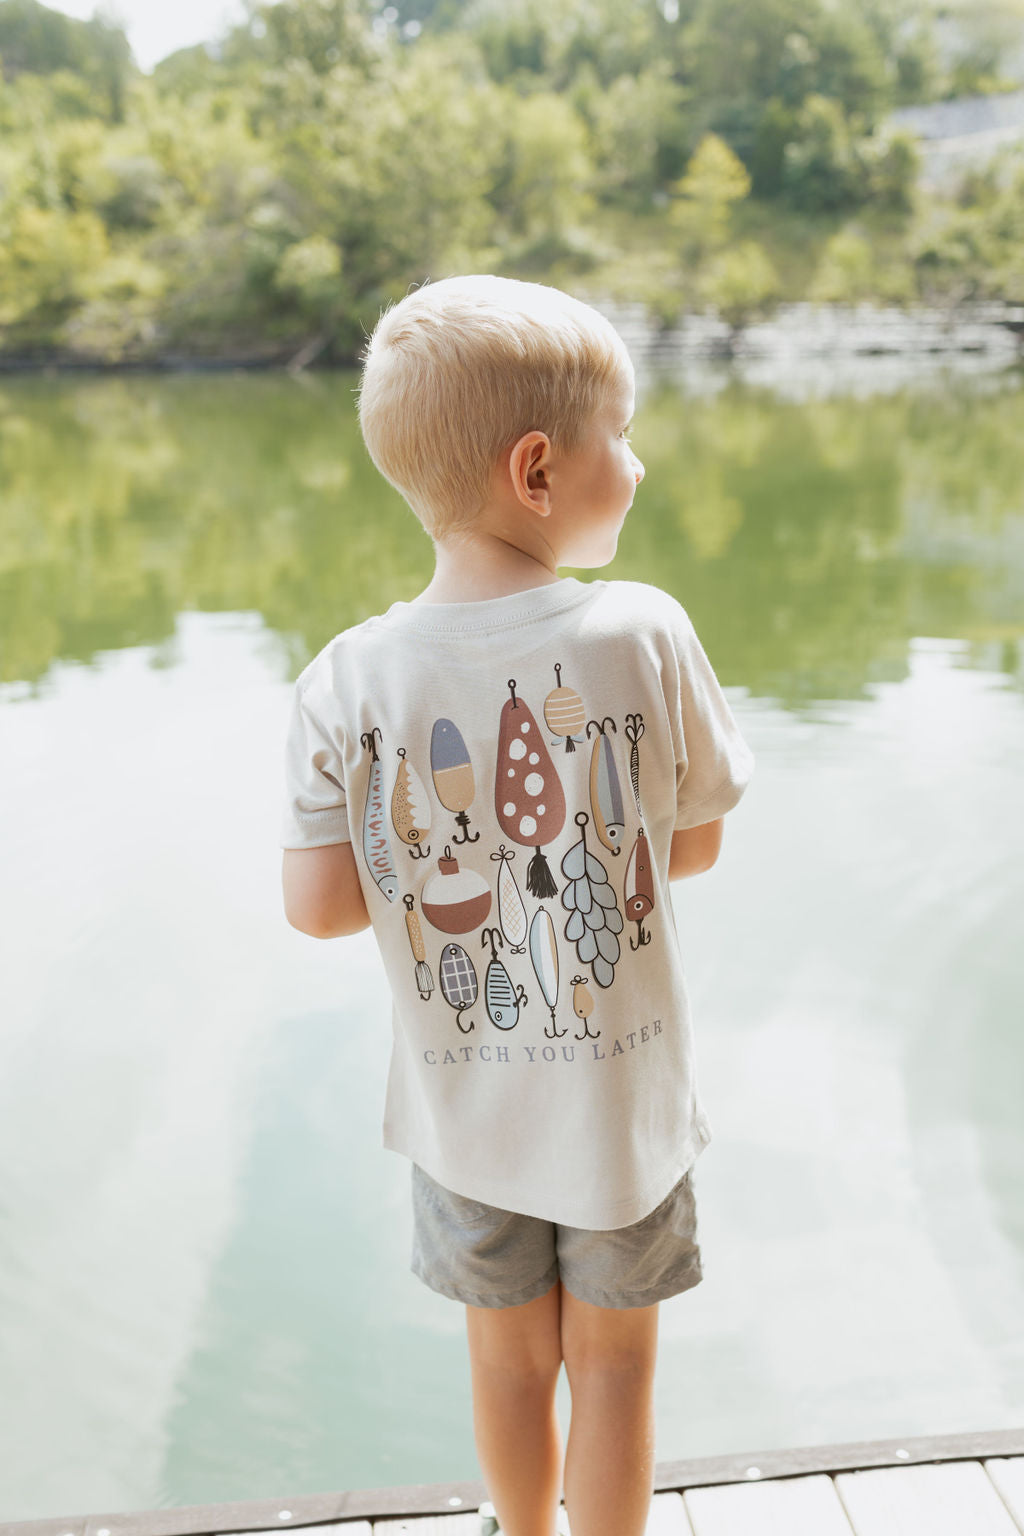 Catch You Later | Boy's Tee-Kids Tees-Sister Shirts-Sister Shirts, Cute & Custom Tees for Mama & Littles in Trussville, Alabama.